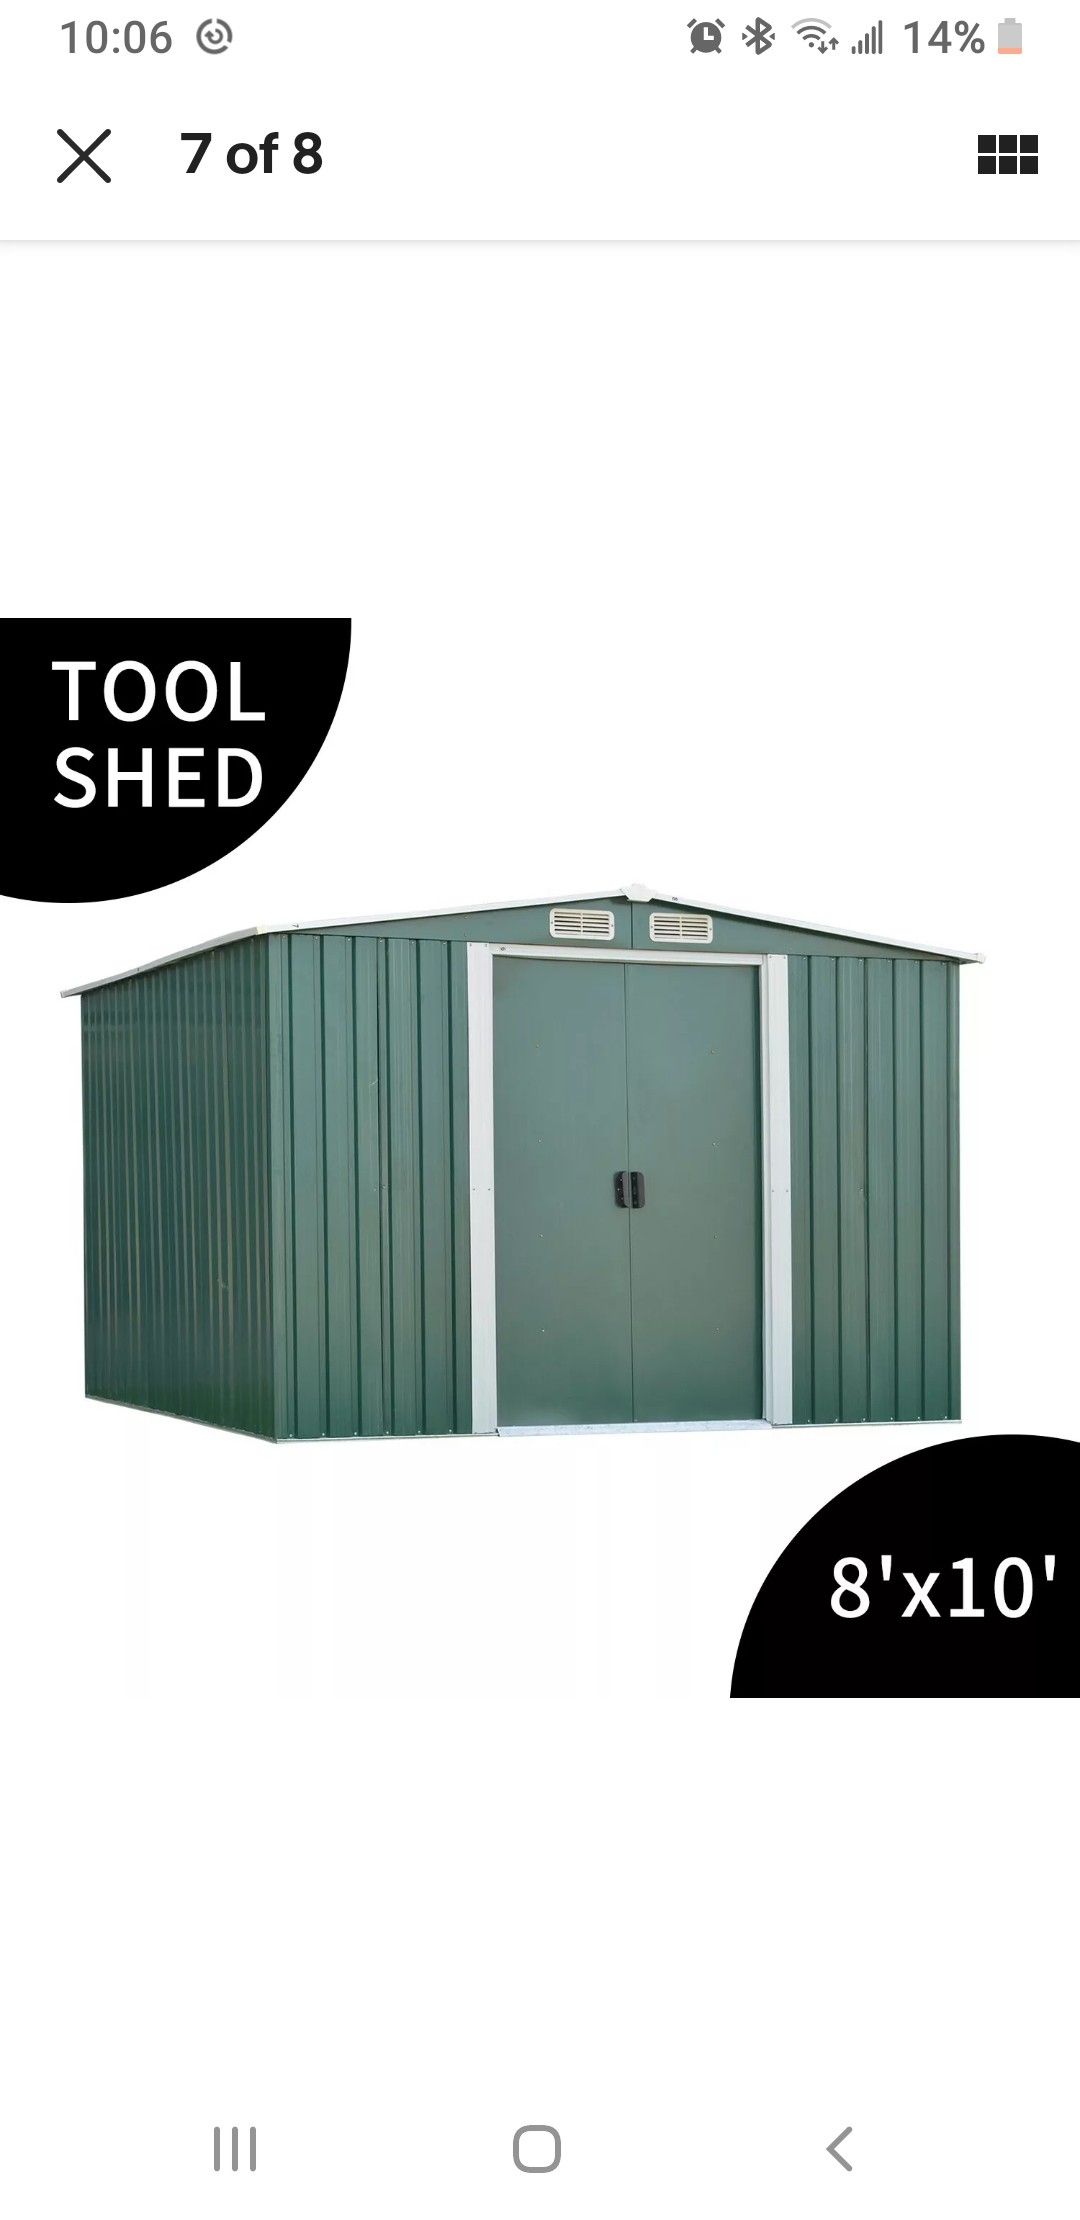 8'x10' Steel Outdoor Garden Storage Shed Tool Shed Cabinet Building Green.